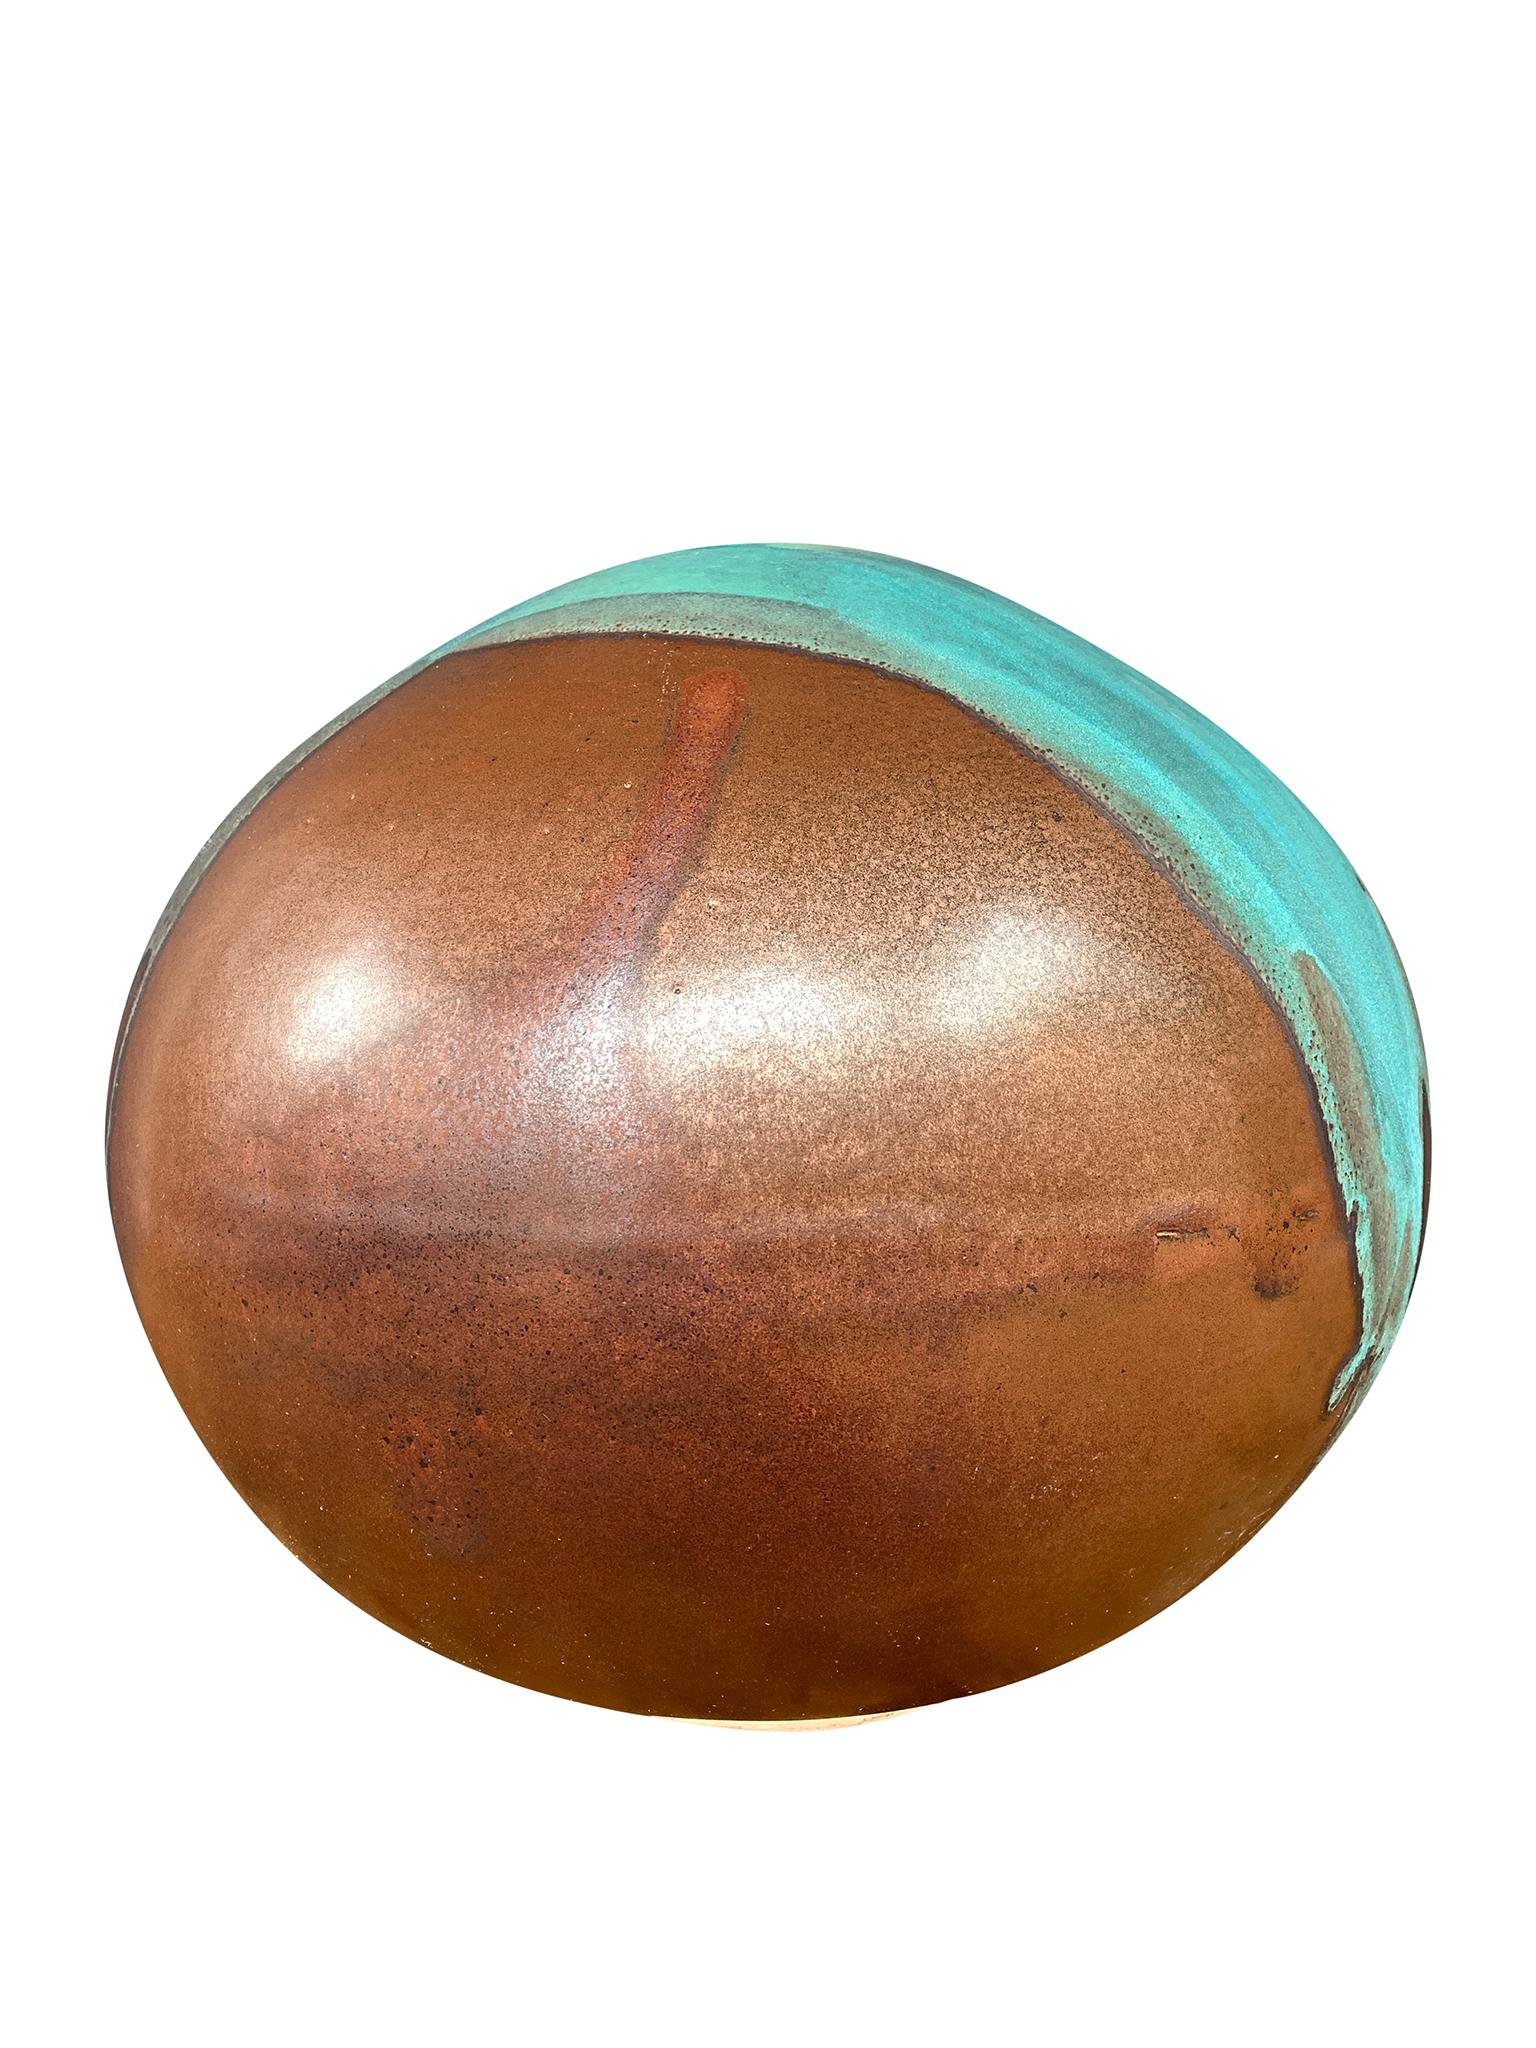 From Thom Lussier's Oxidized Copper Collection - a series of ceramic vessels that stand out for their rich textures and brilliant palette of copper and turquoise.

White stoneware, midfire glaze, cone 6.

Dimensions:
13 in. diameter
11.5 in.